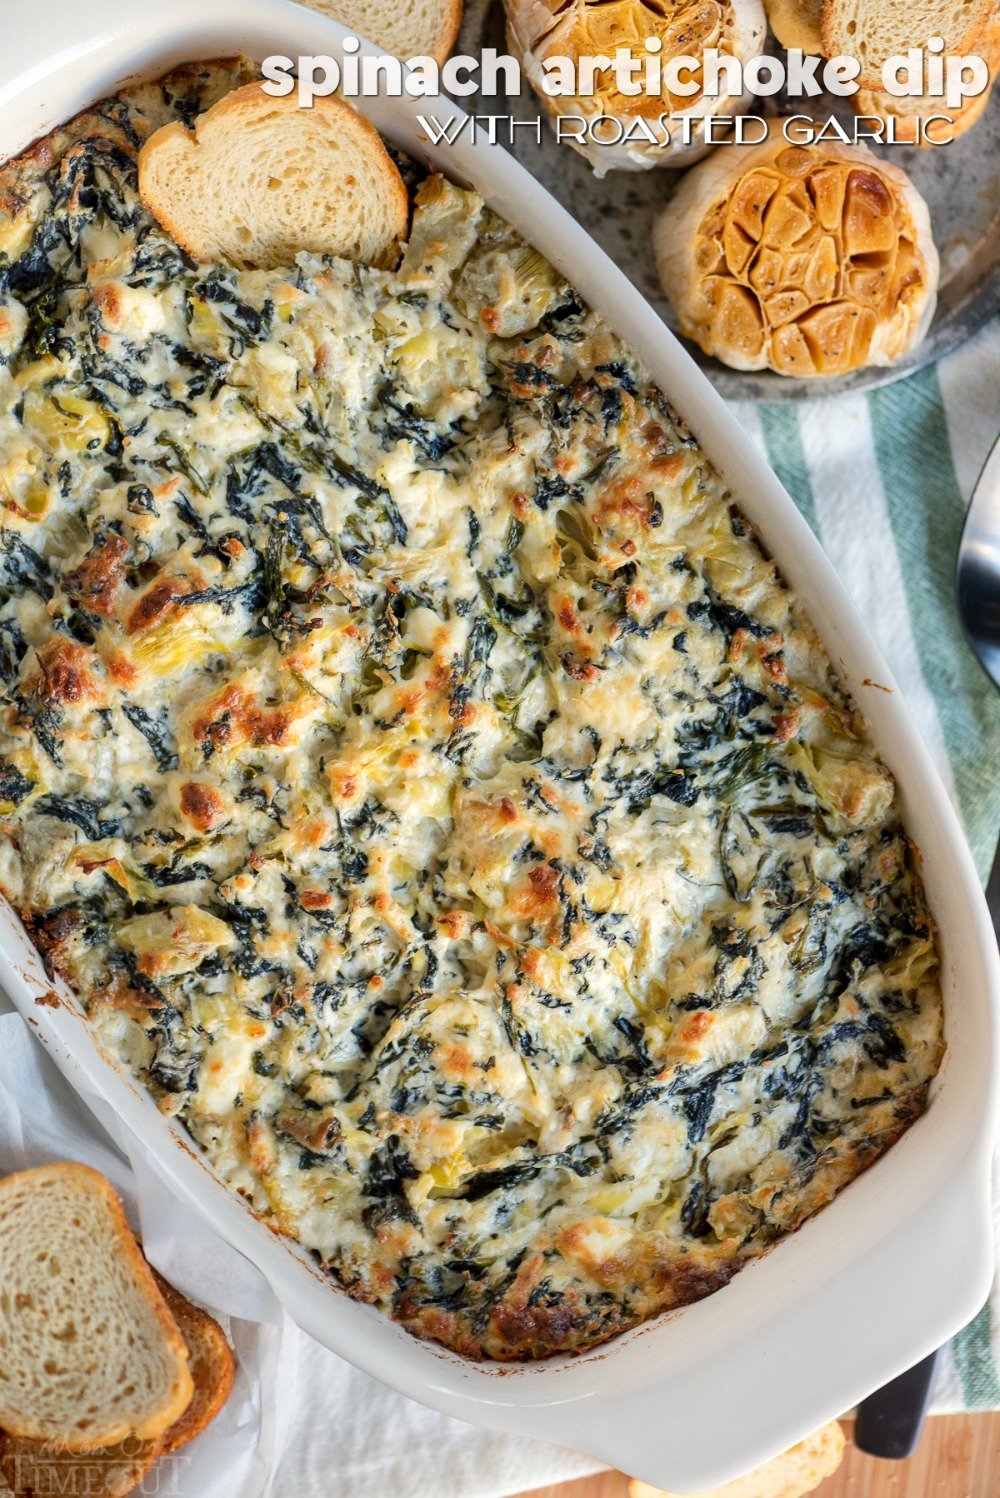 Spinach Artichoke Dip with Roasted Garlic